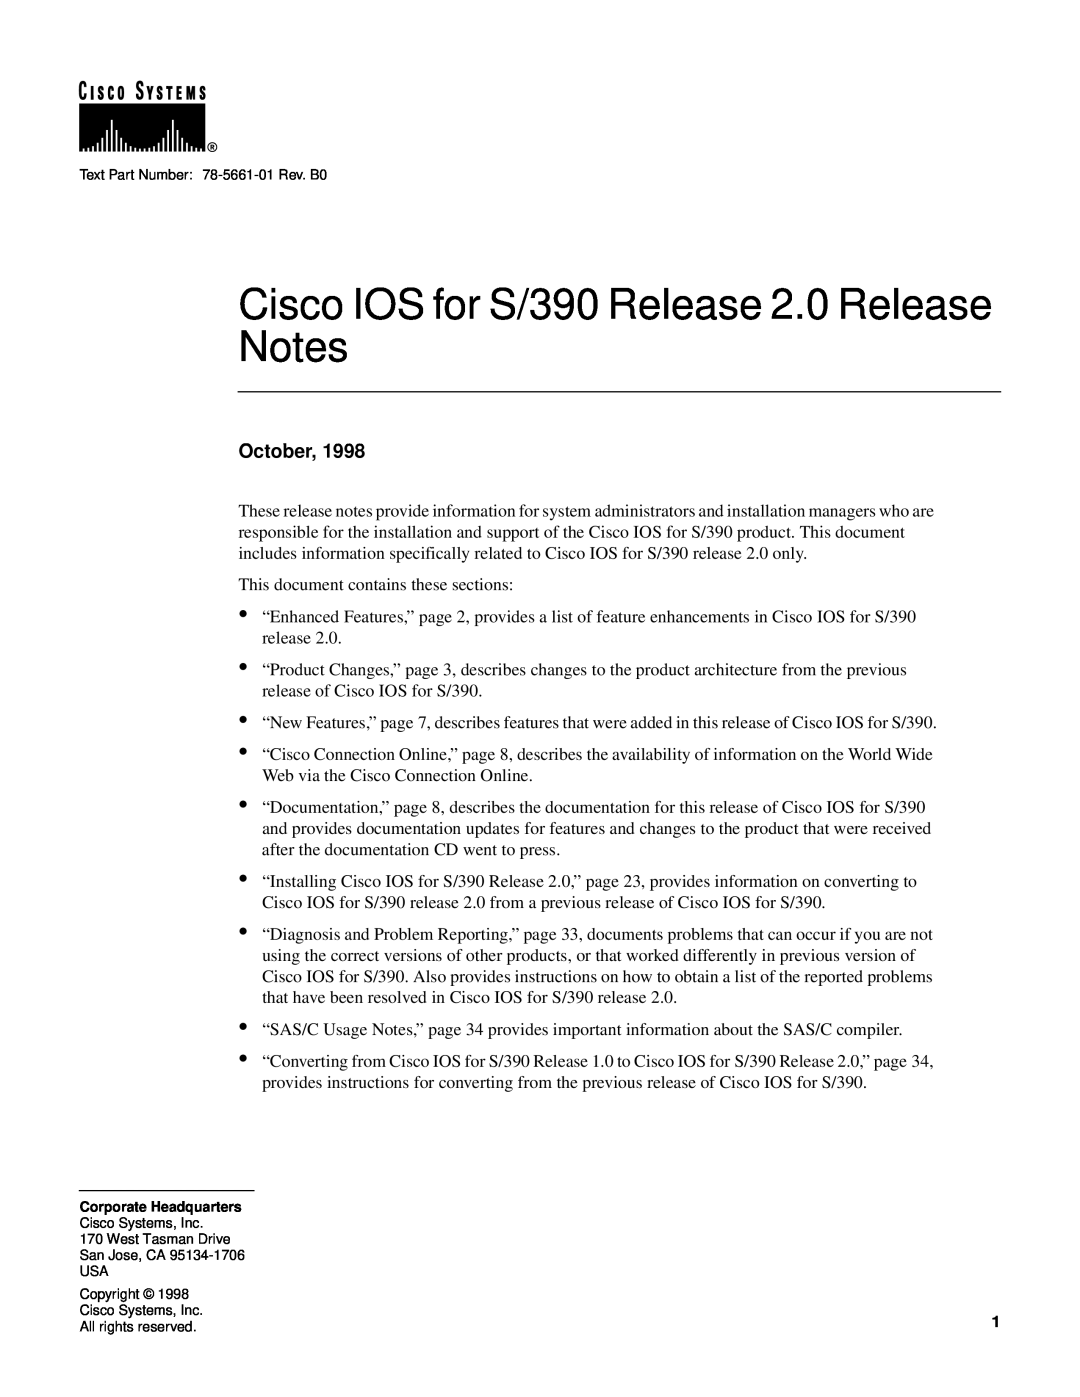 Cisco Systems manual Cisco IOS for S/390 Release 2.0 Release Notes, October 